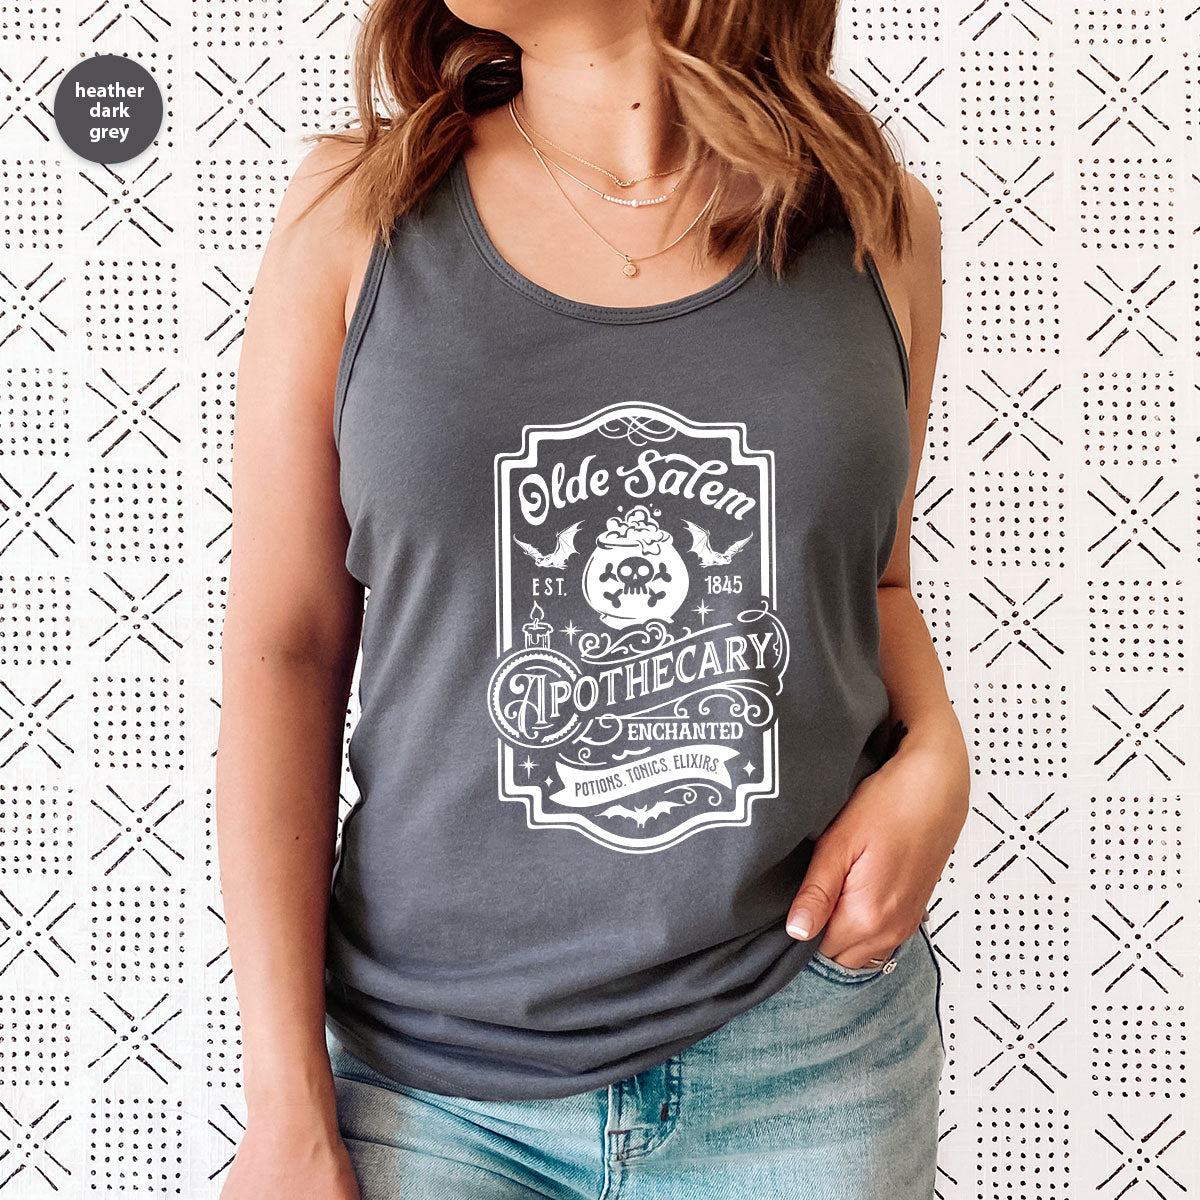 Spooky Season Clothing, Witches Crewneck Sweatshirts, Halloween Gifts, Salem Graphic Tees, Girls Apothecary T-Shirt, Womens Vneck Tshirt